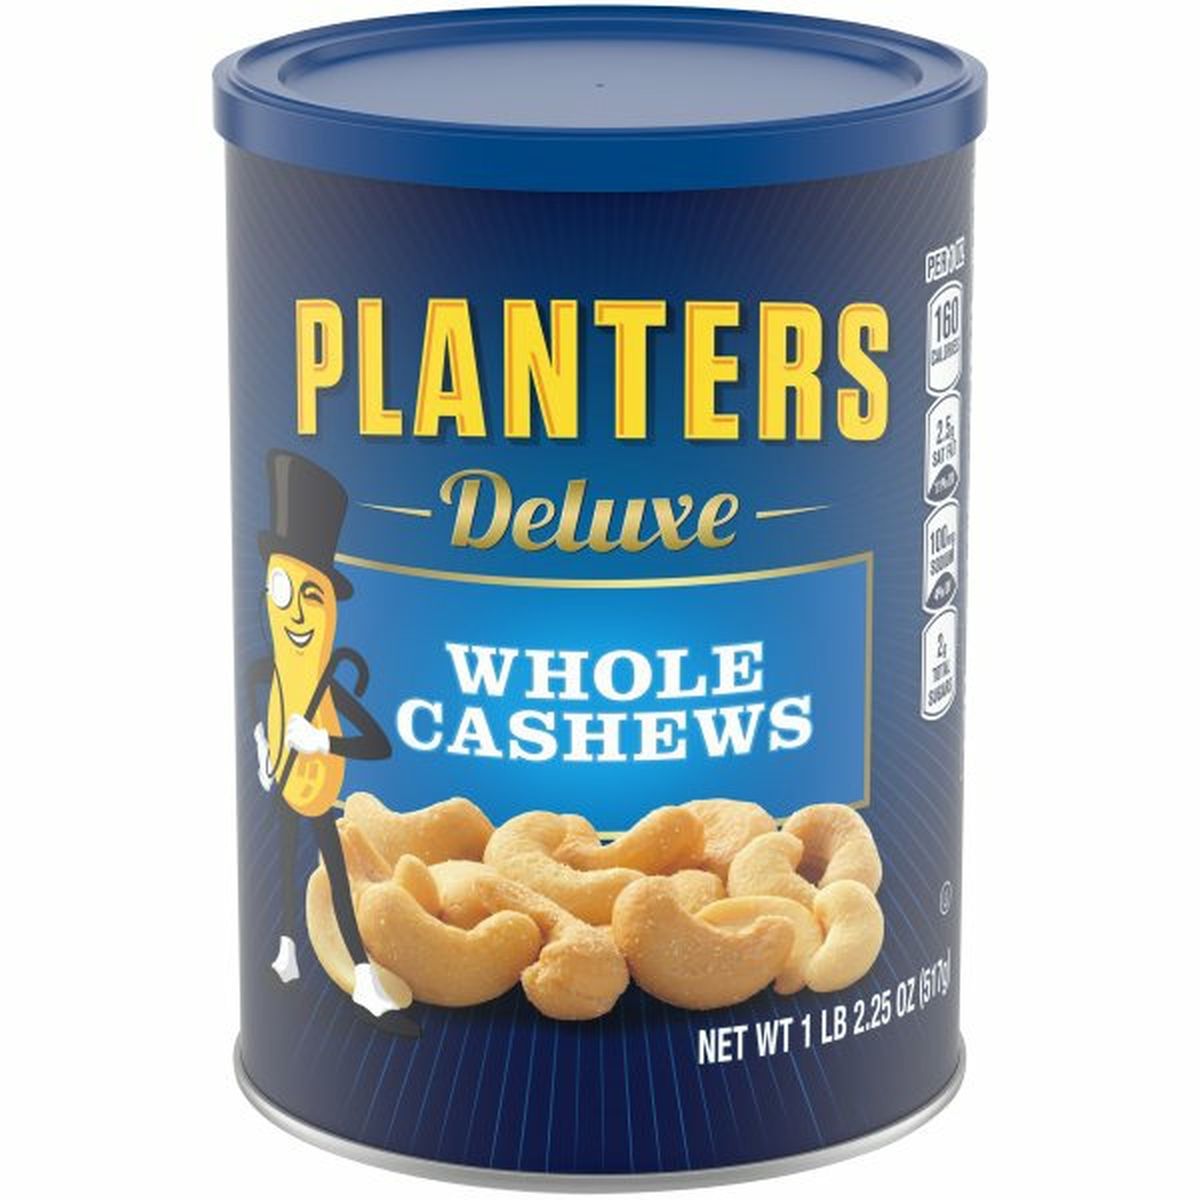 Calories in Planters Deluxe Deluxe Whole Cashews